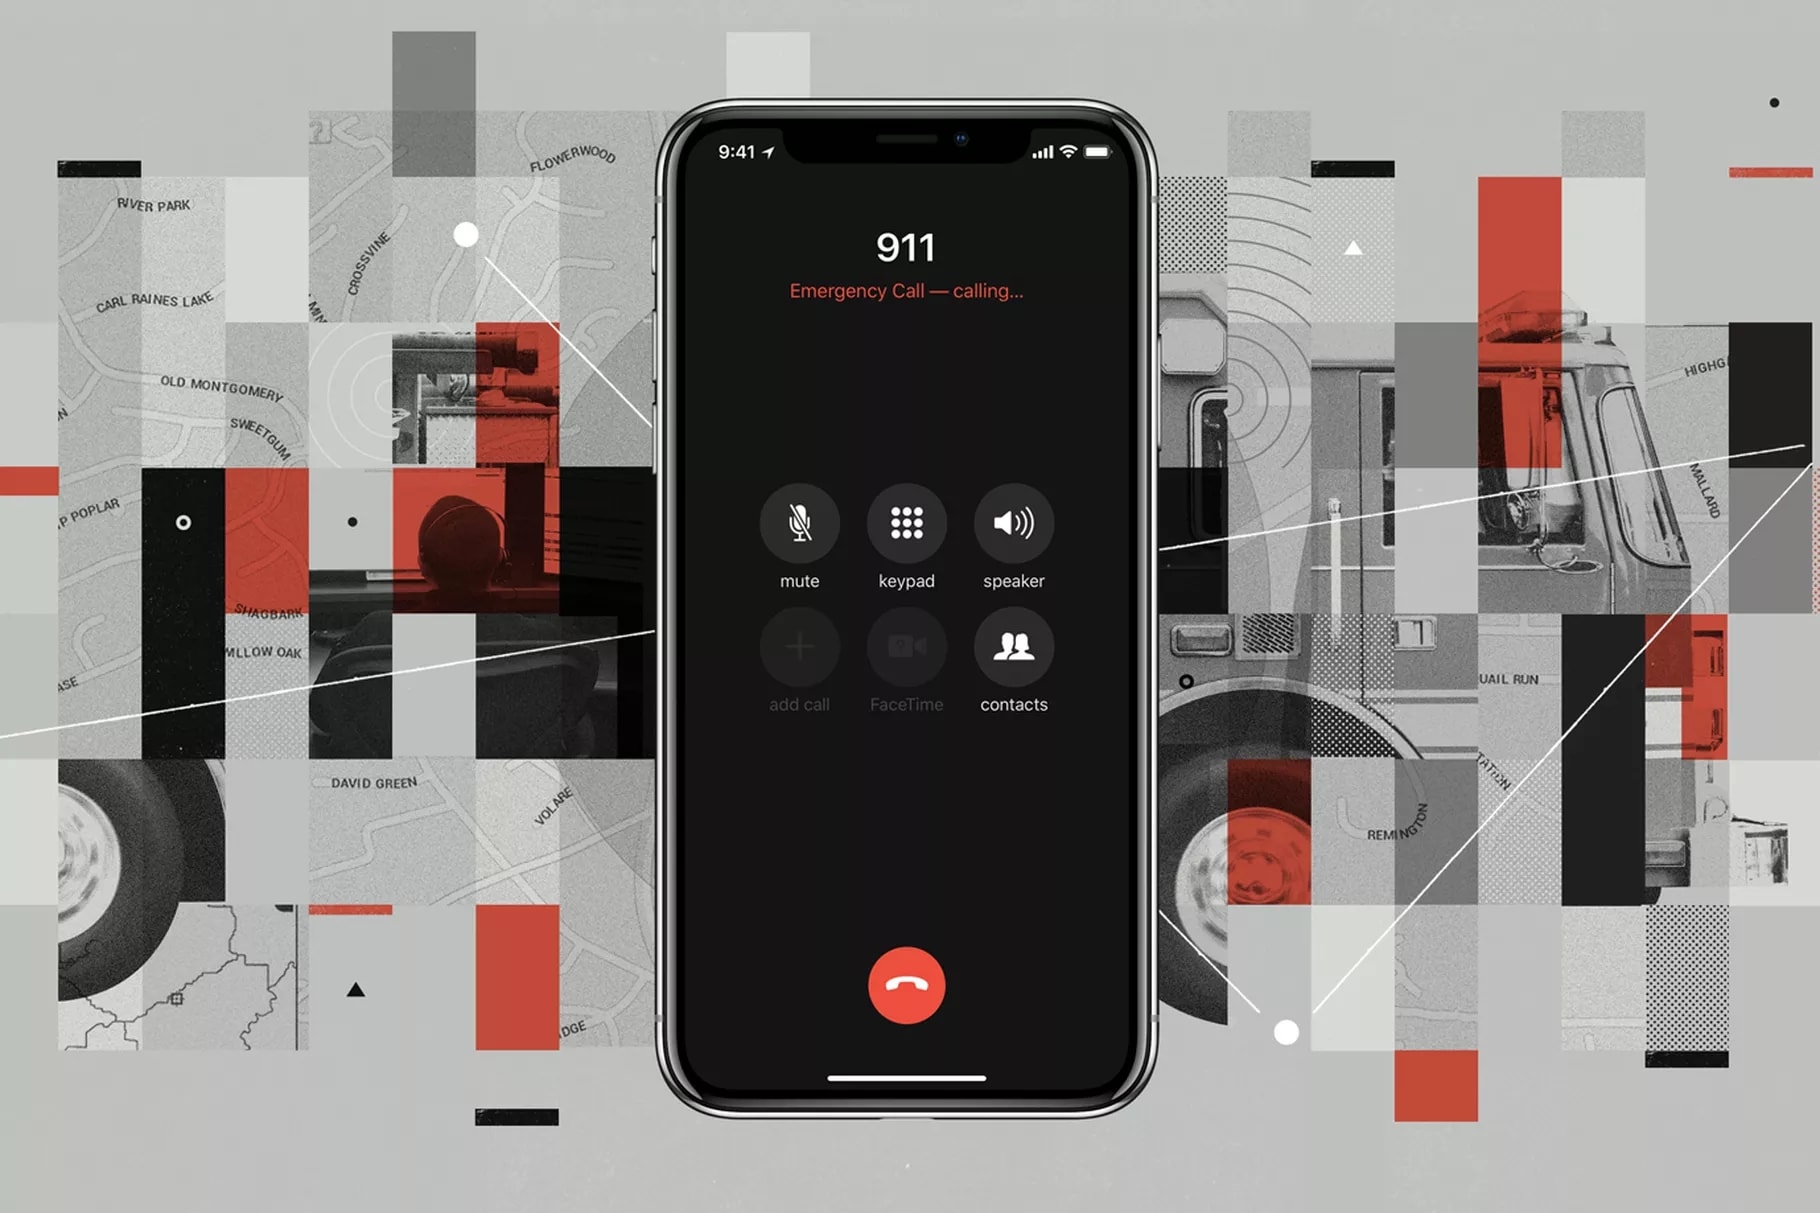 iOS 12 share location during 911 calls